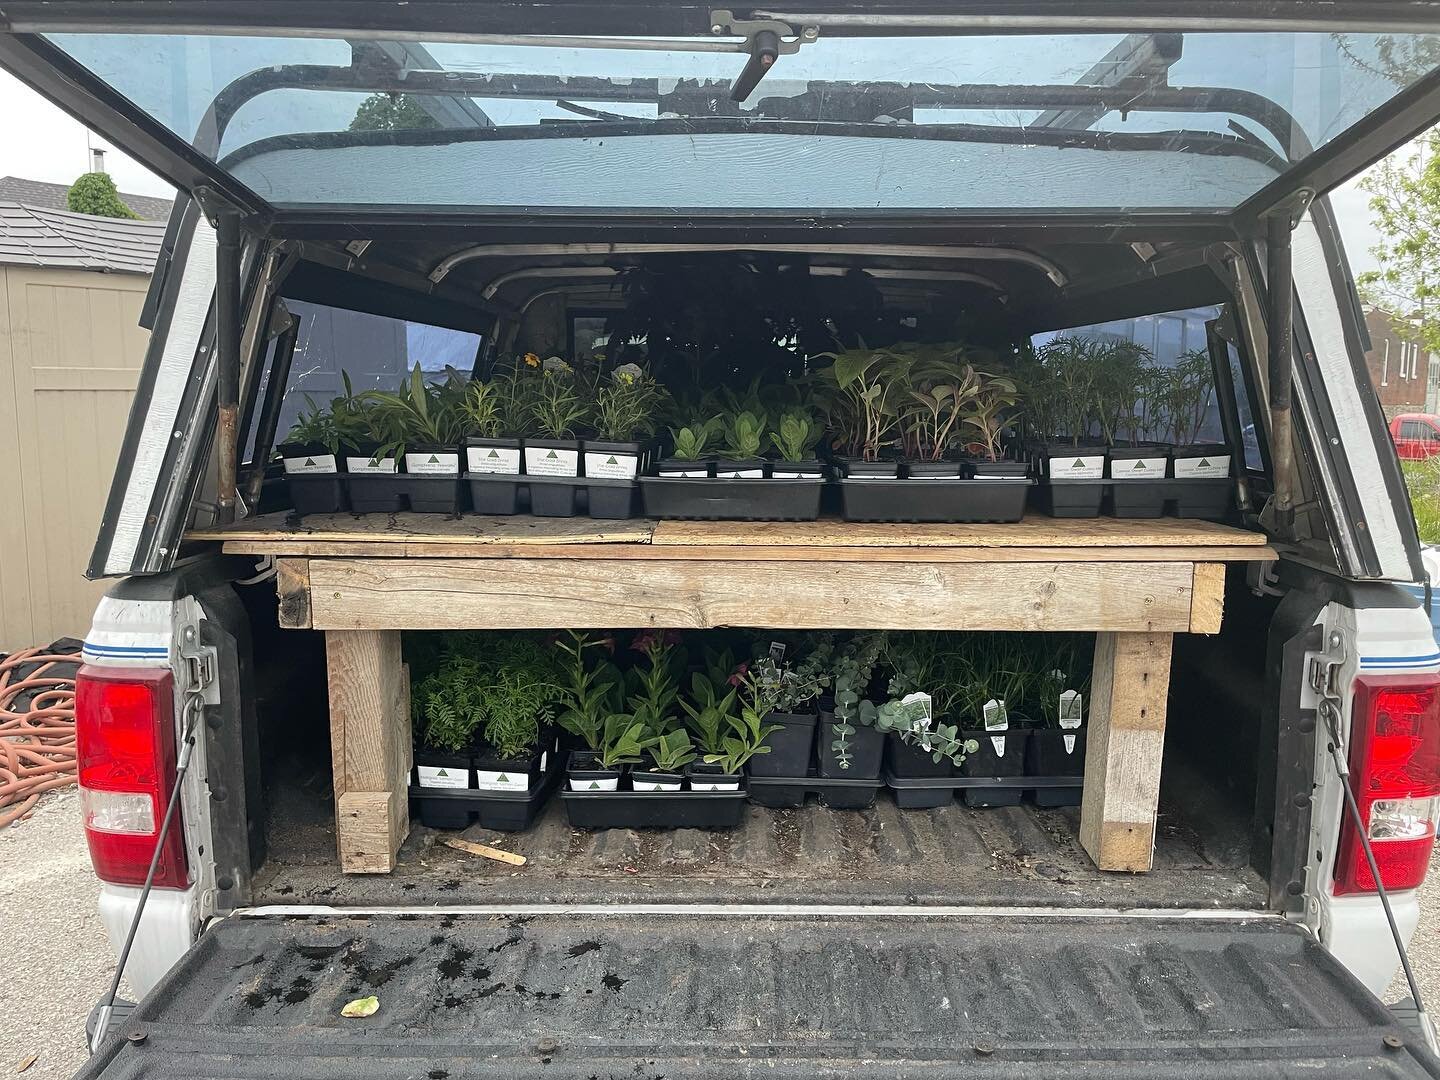 Delivery days are upon us! #urbannursery #peatfree